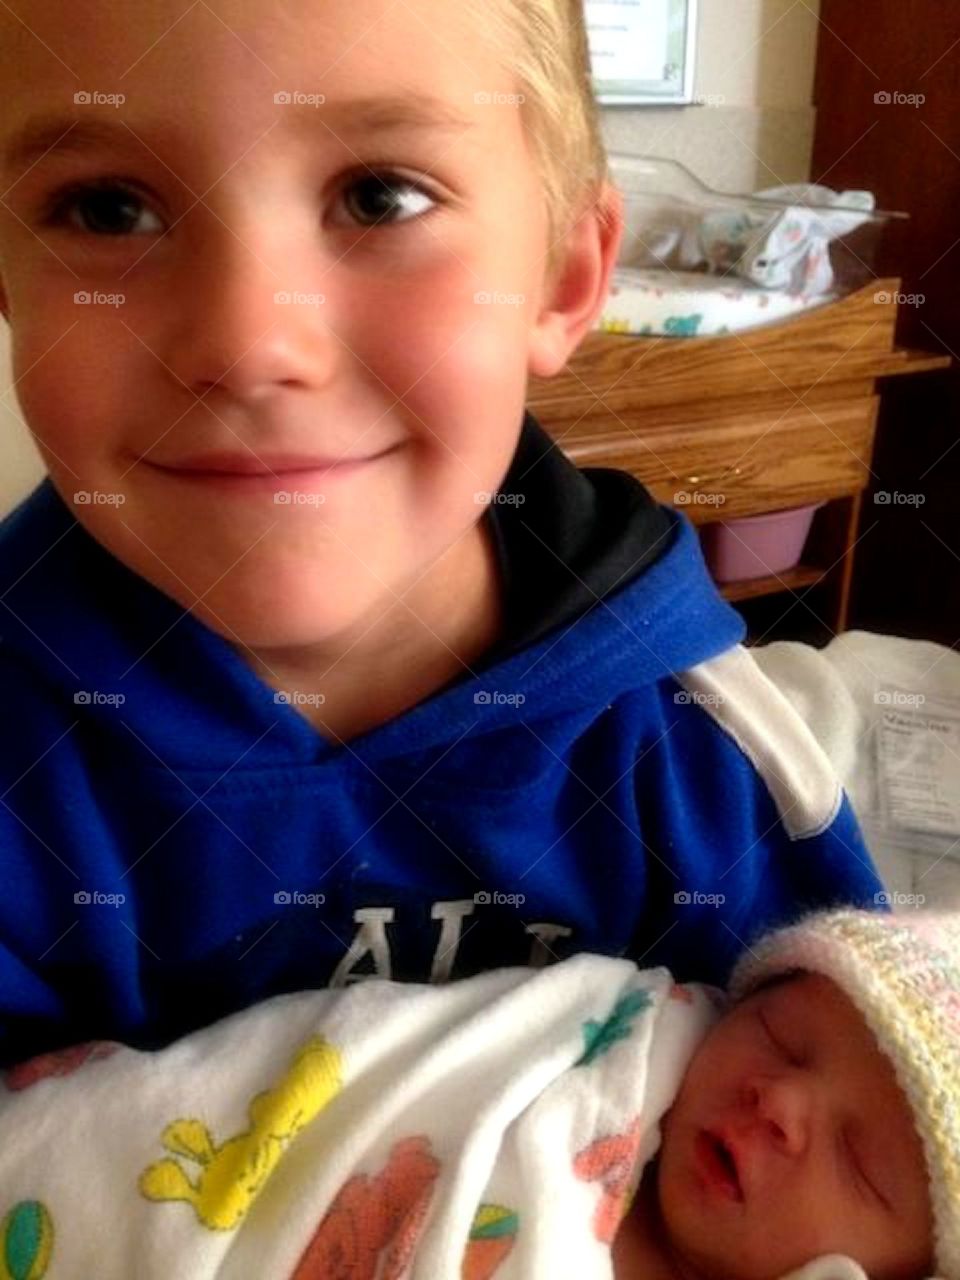 Big Brother Smile. Nothing more priceless than the proud smile of a Big Brother, while holding his baby sister.